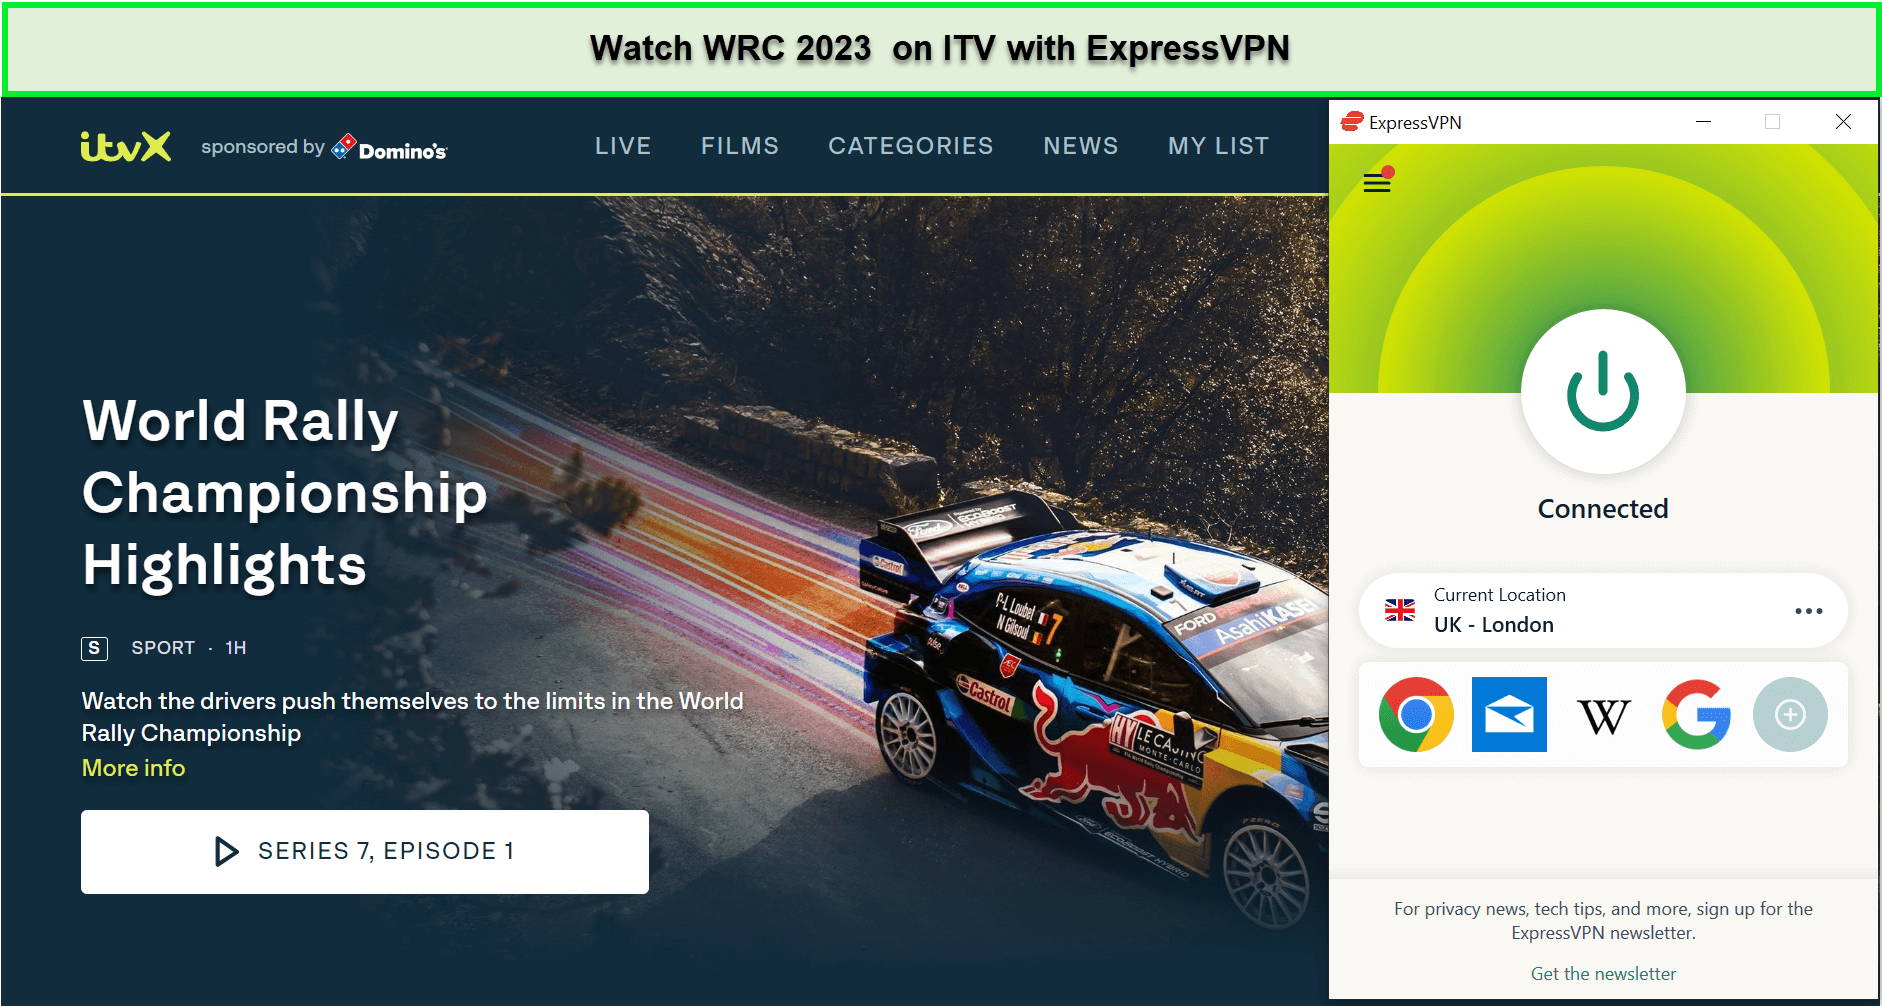 Watch-WRC-2023-in-New Zealand-on-ITV-with-ExpressVPN